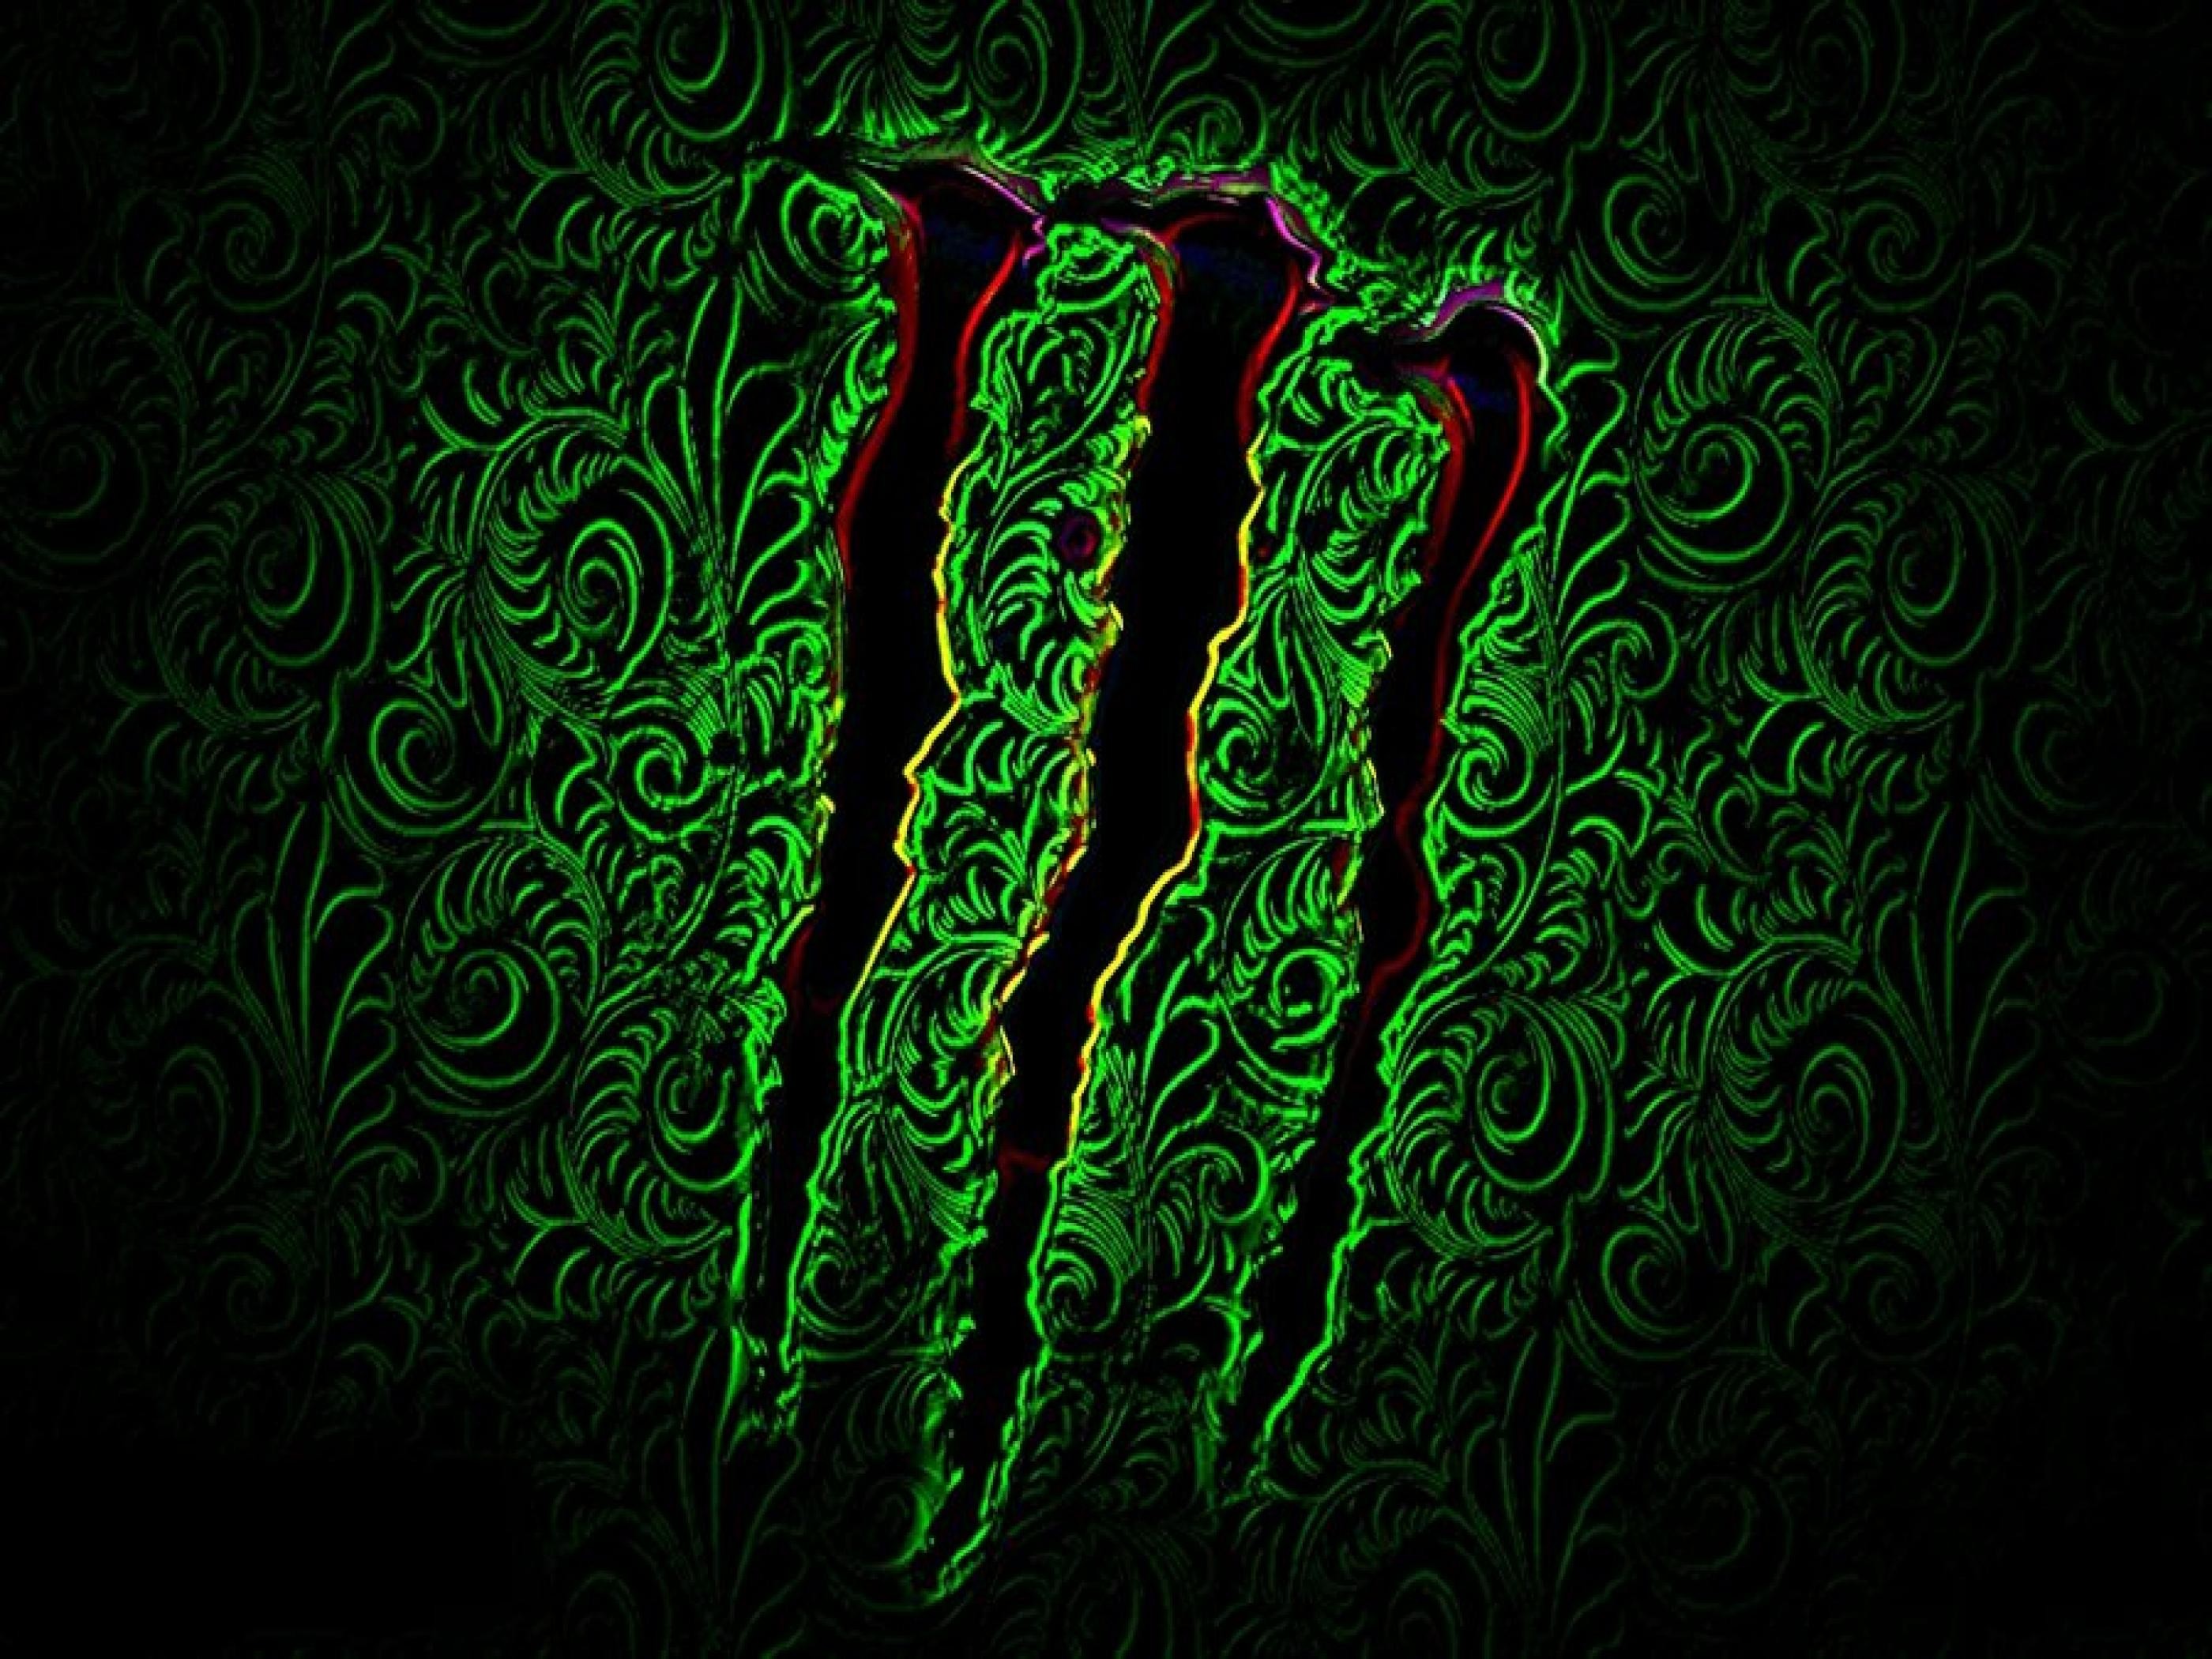 2800x2100 monster energy picture wallpapers hd desktop wallpapers 4k windows 10 mac  apple colourful images backgrounds download wallpaper free 2800Ã2100  Wallpaper HD